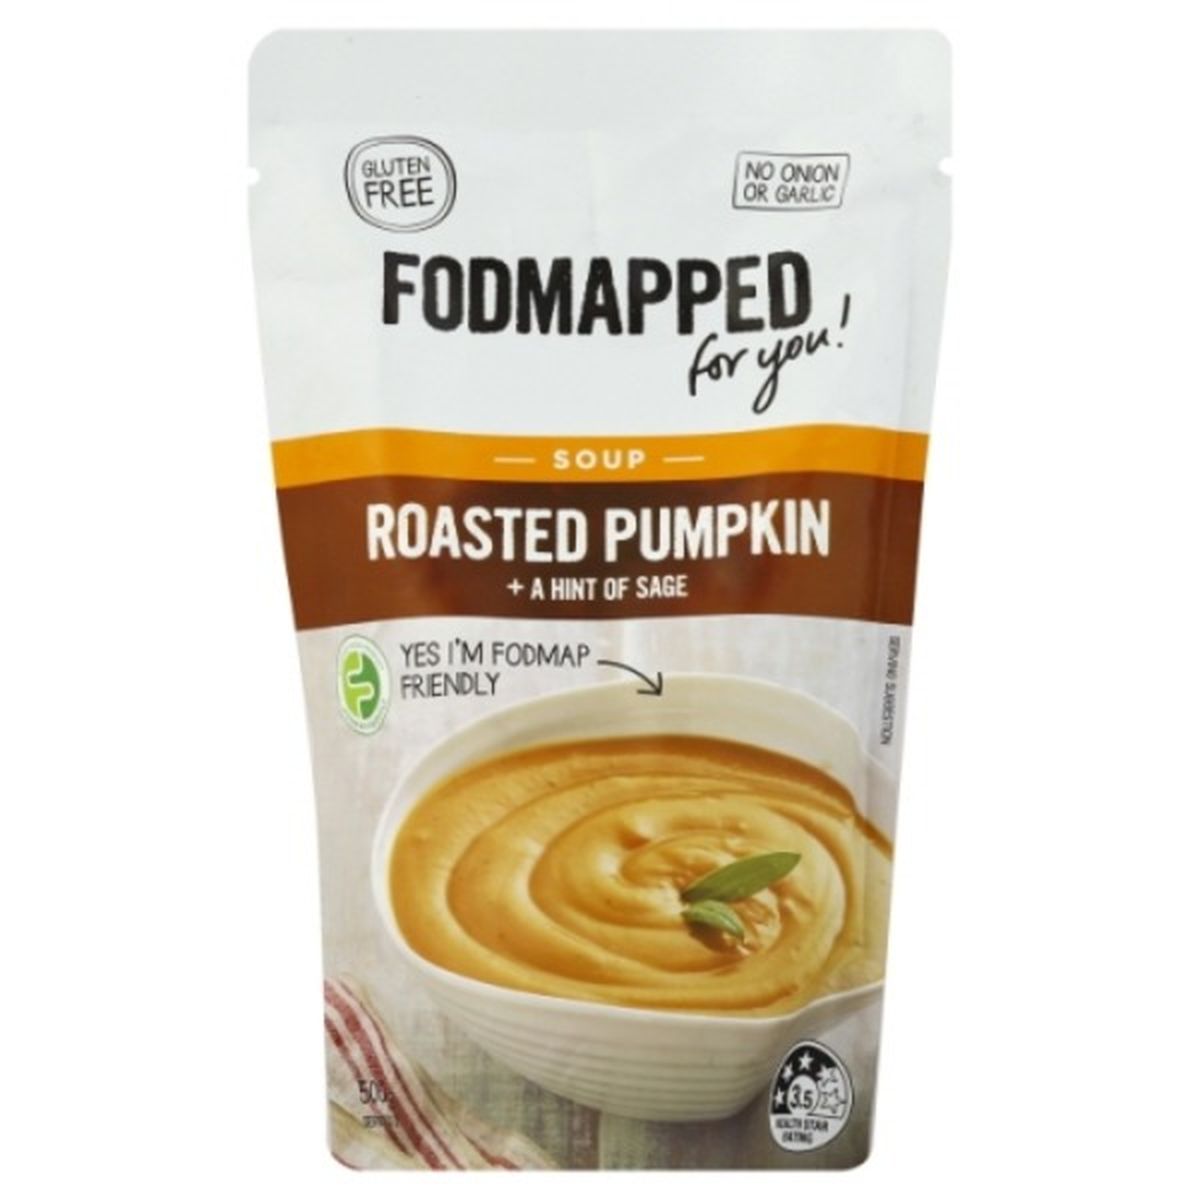 Calories in Fodmapped Soup, Roasted Pumpkin + a Hint of Sage